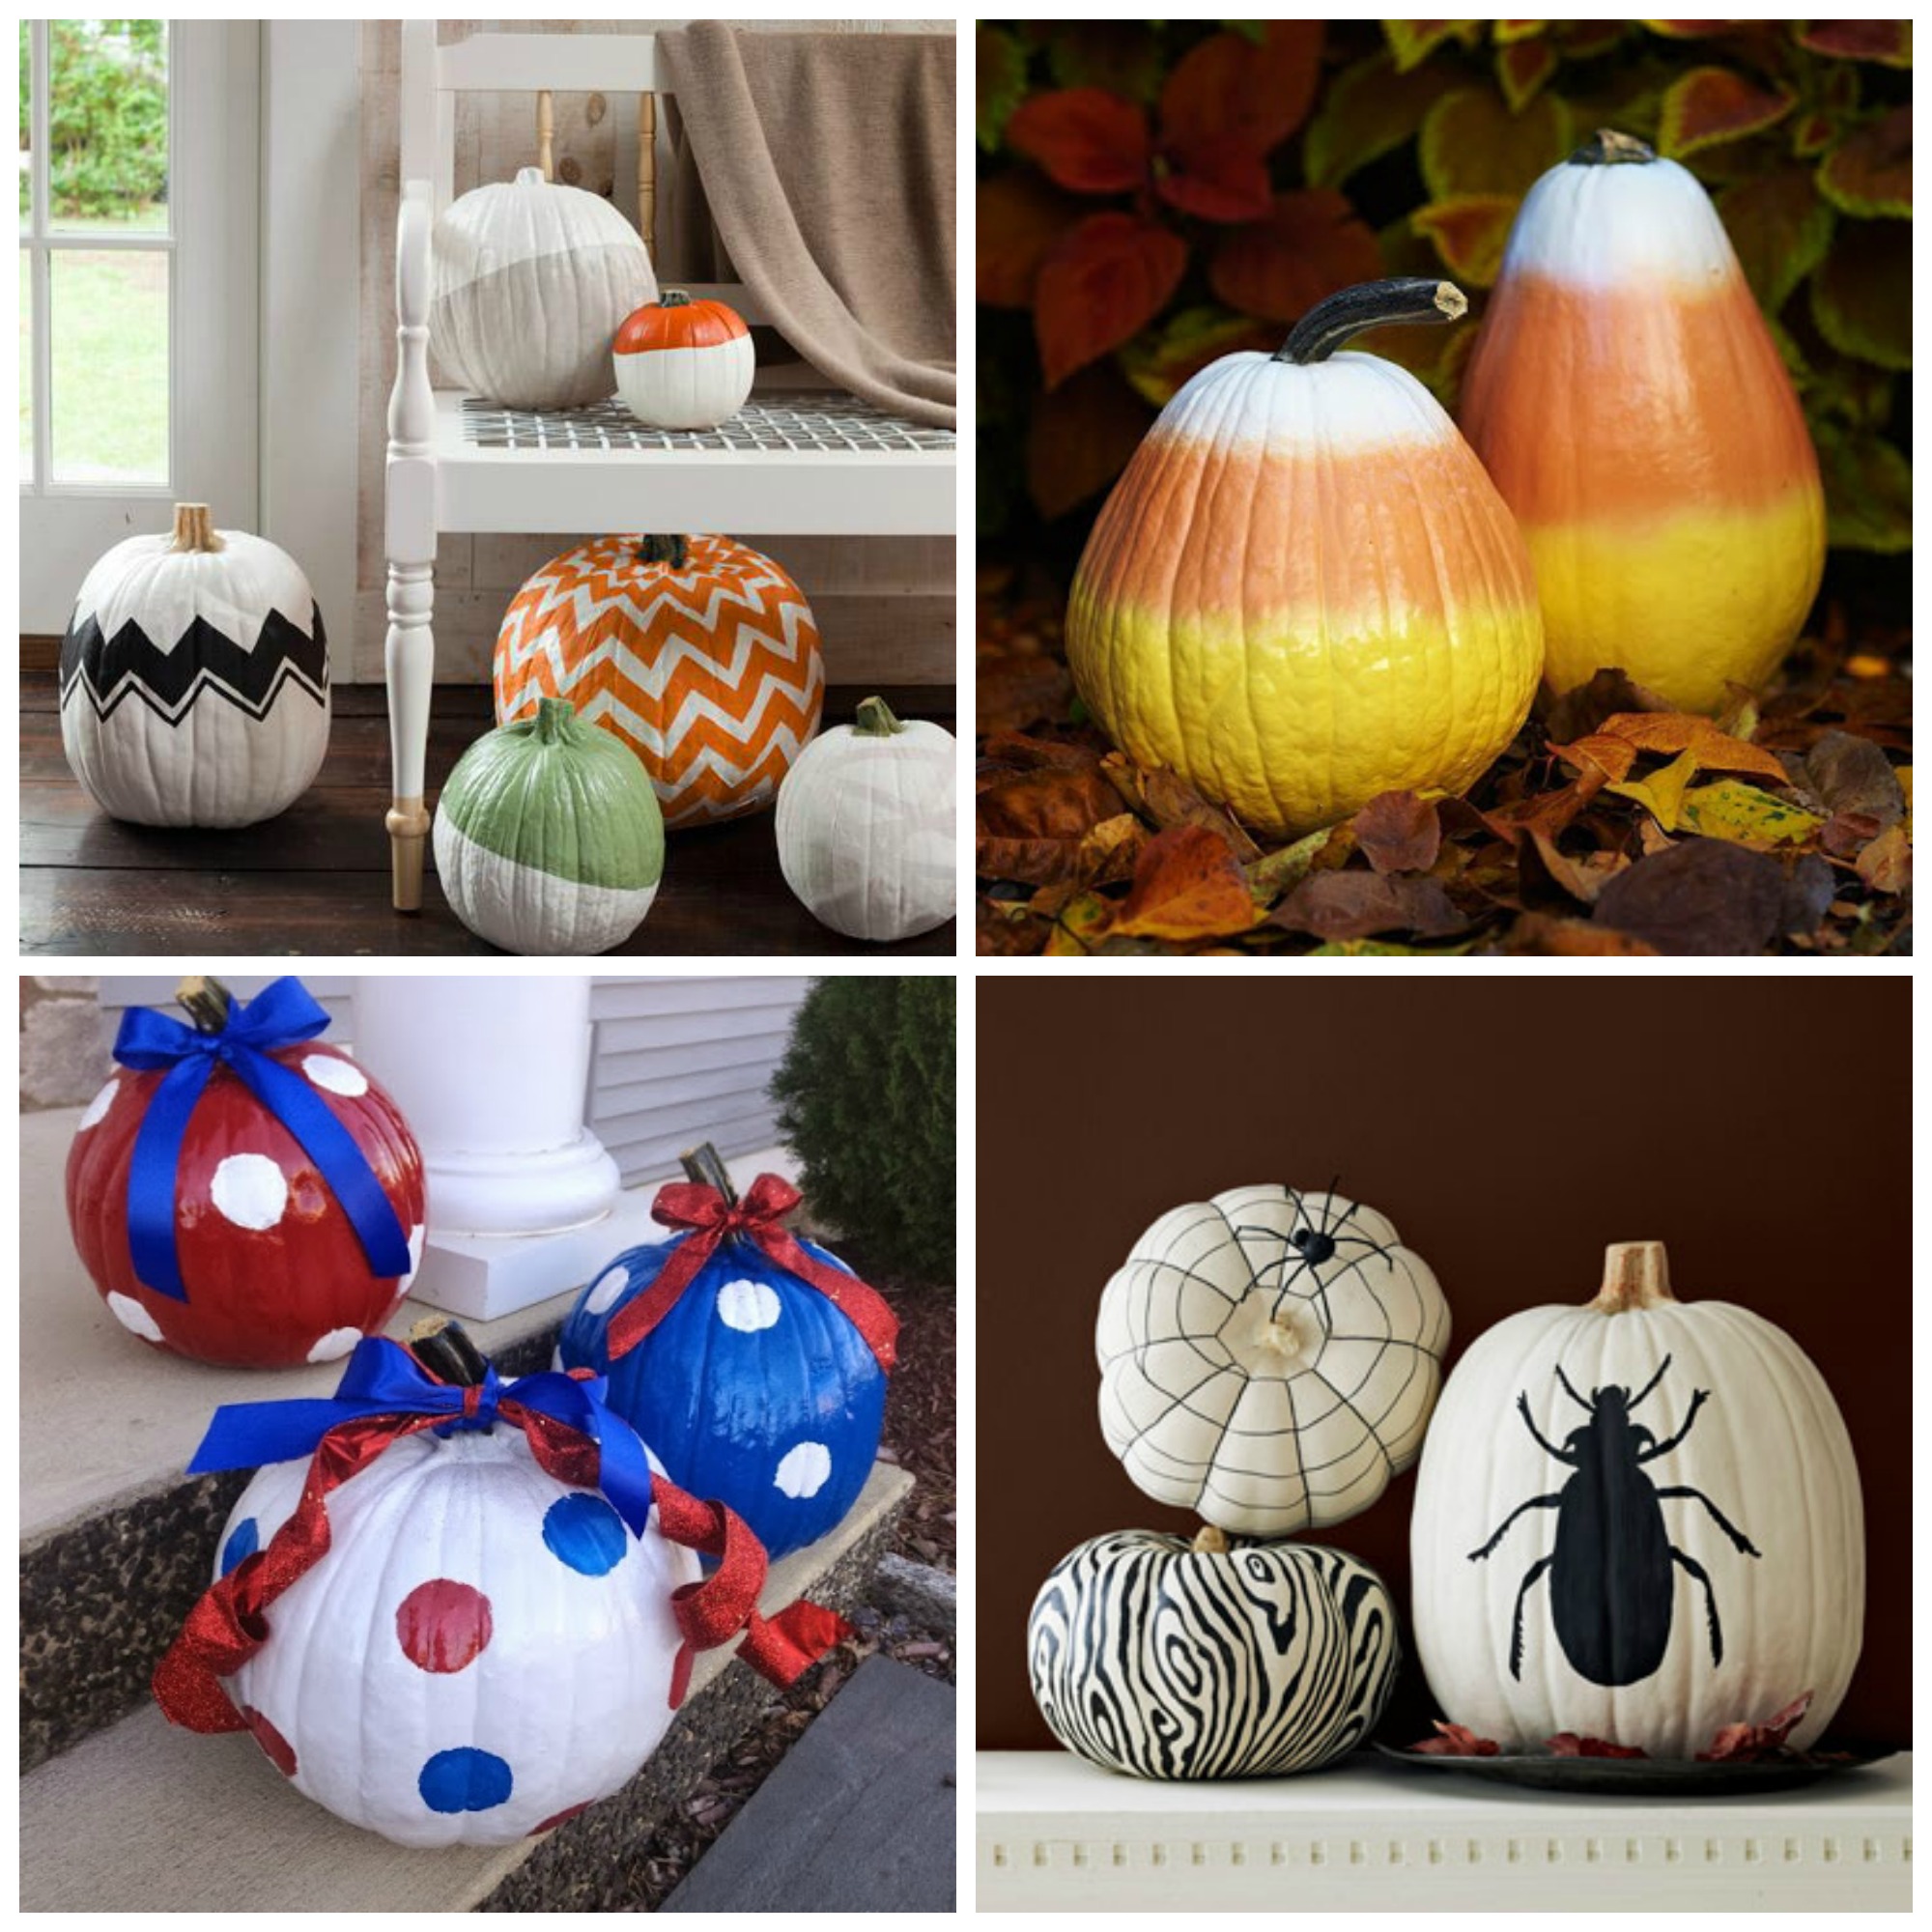 pumpkin-decorating-ideas-and-my-curated-pumpkin-roundup-h20bungalow